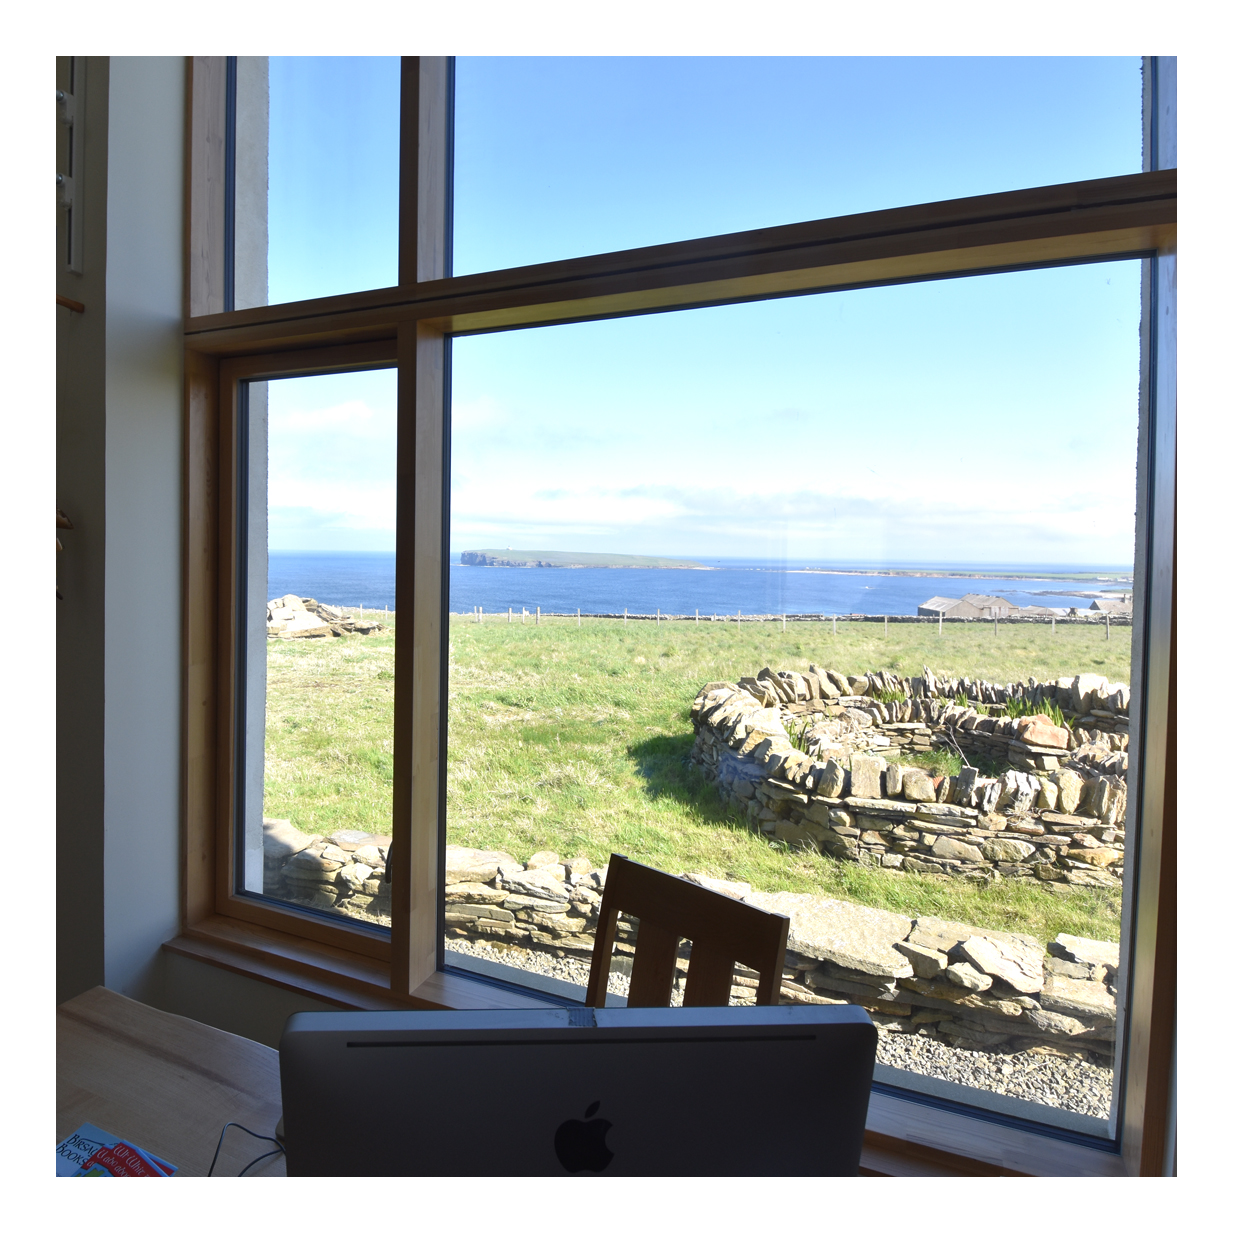 The view from our shop window showing the bay and brough of Birsay